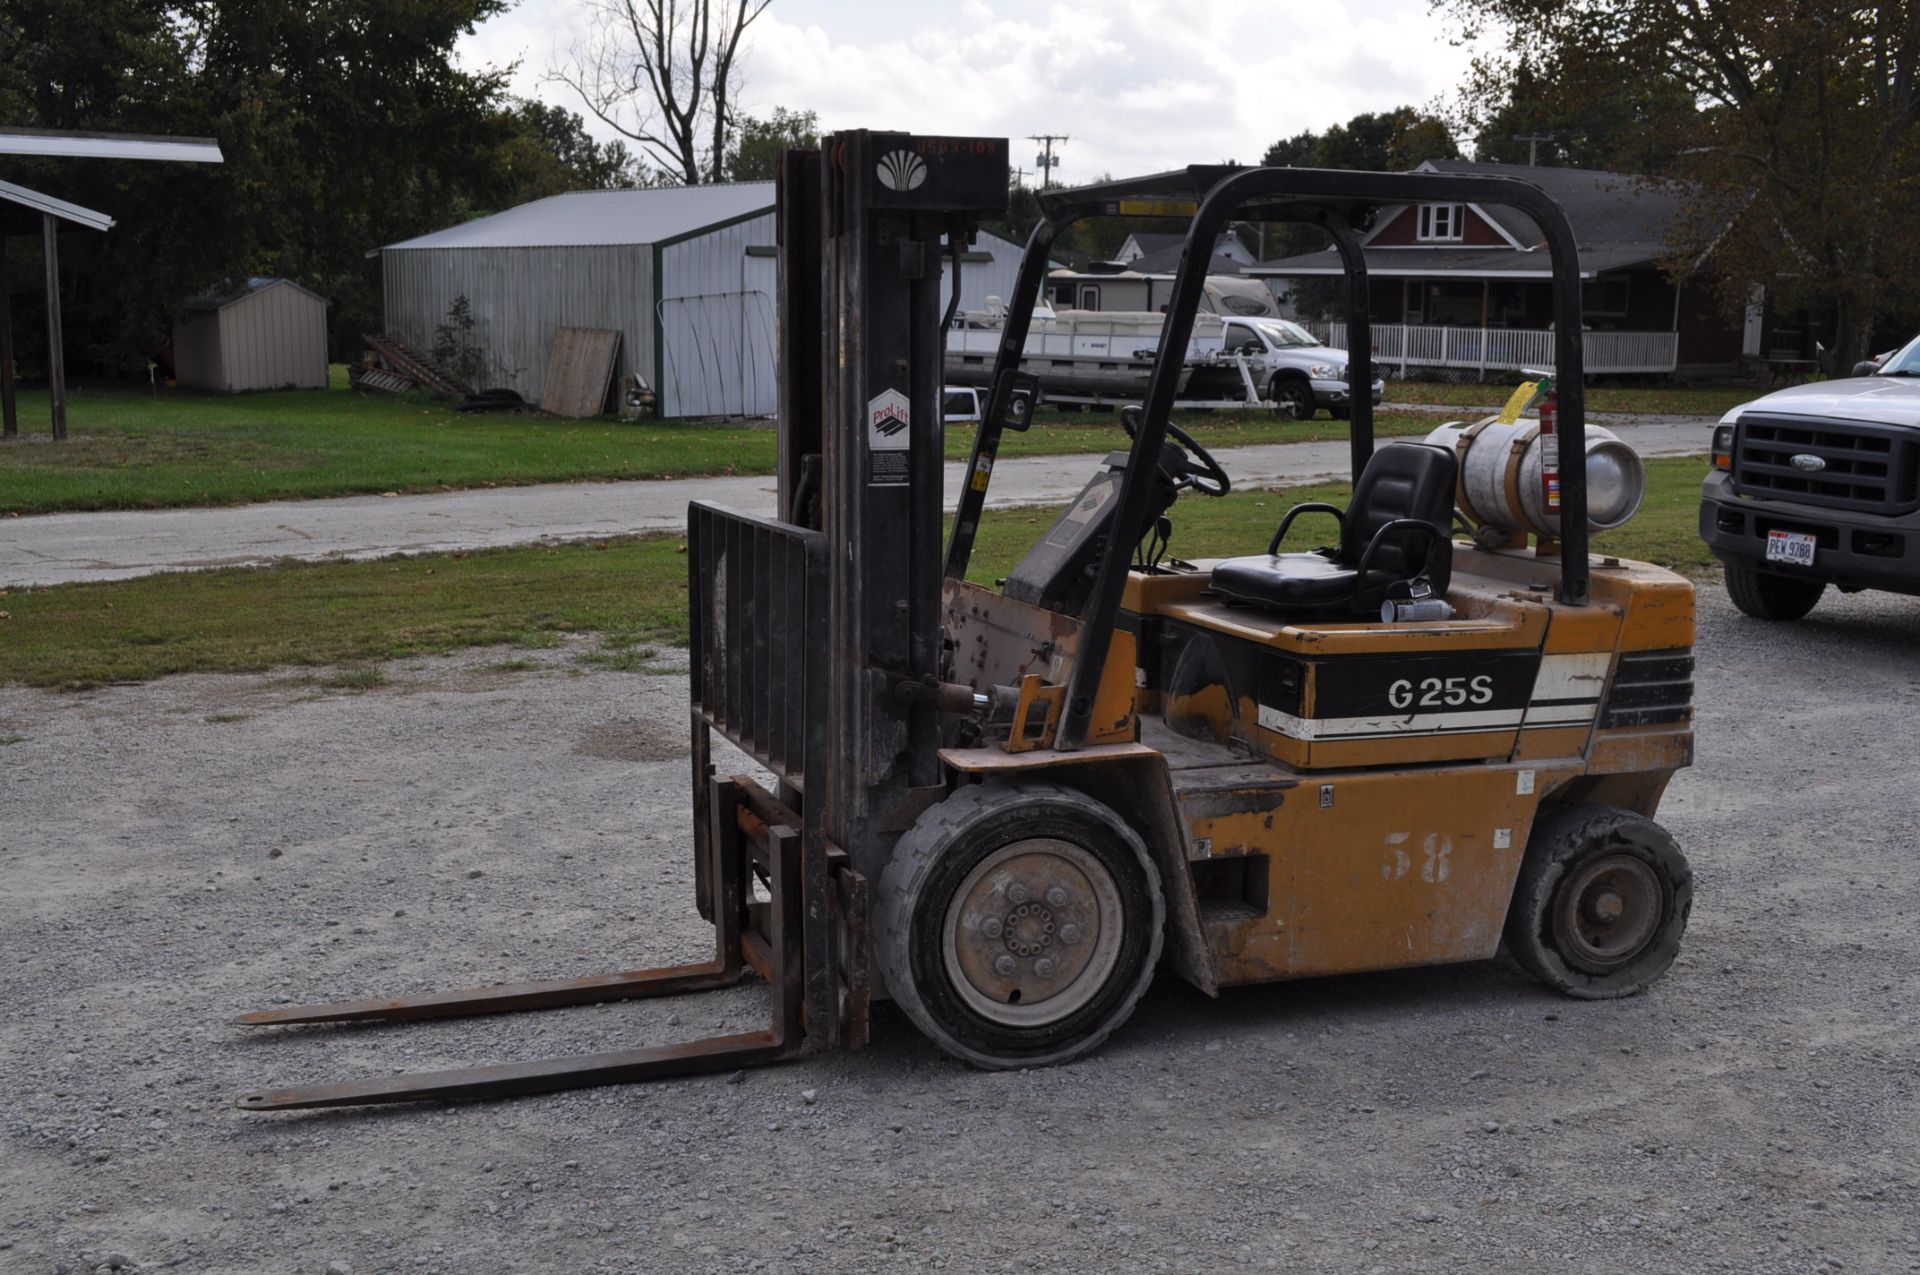 Daewoo G25S forklift, propane, sideshift, 7.00x15 front tires, 6.50-10 rear tires, 3 stage mast